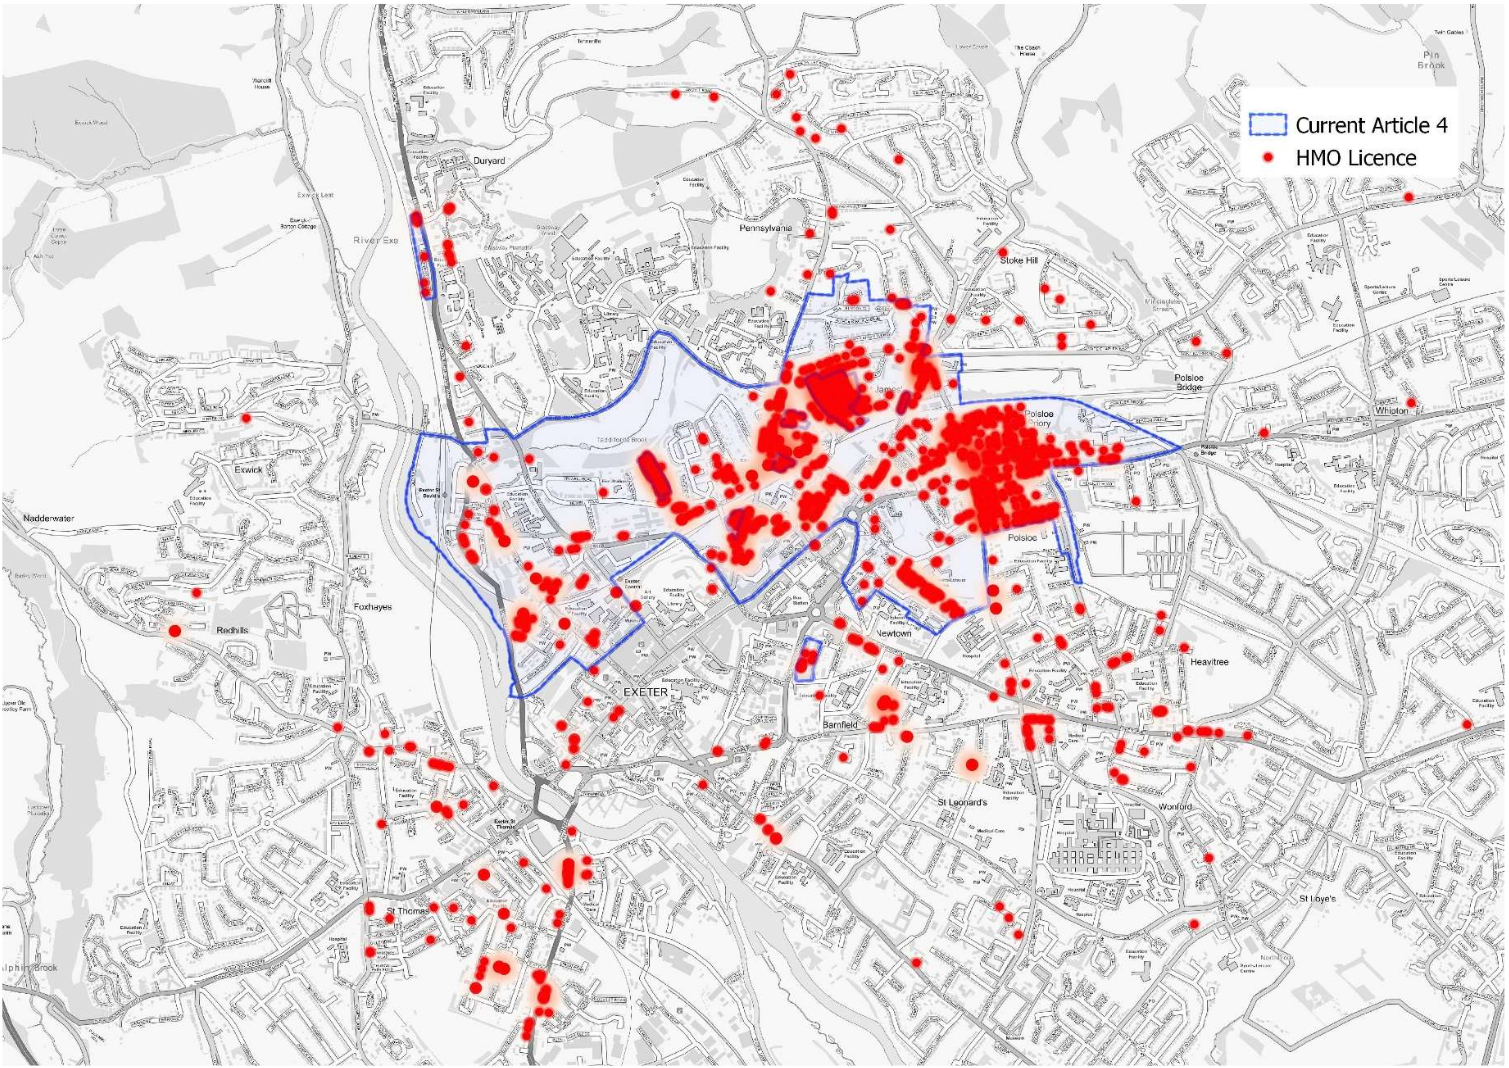 HMO license locations in Exeter city centre